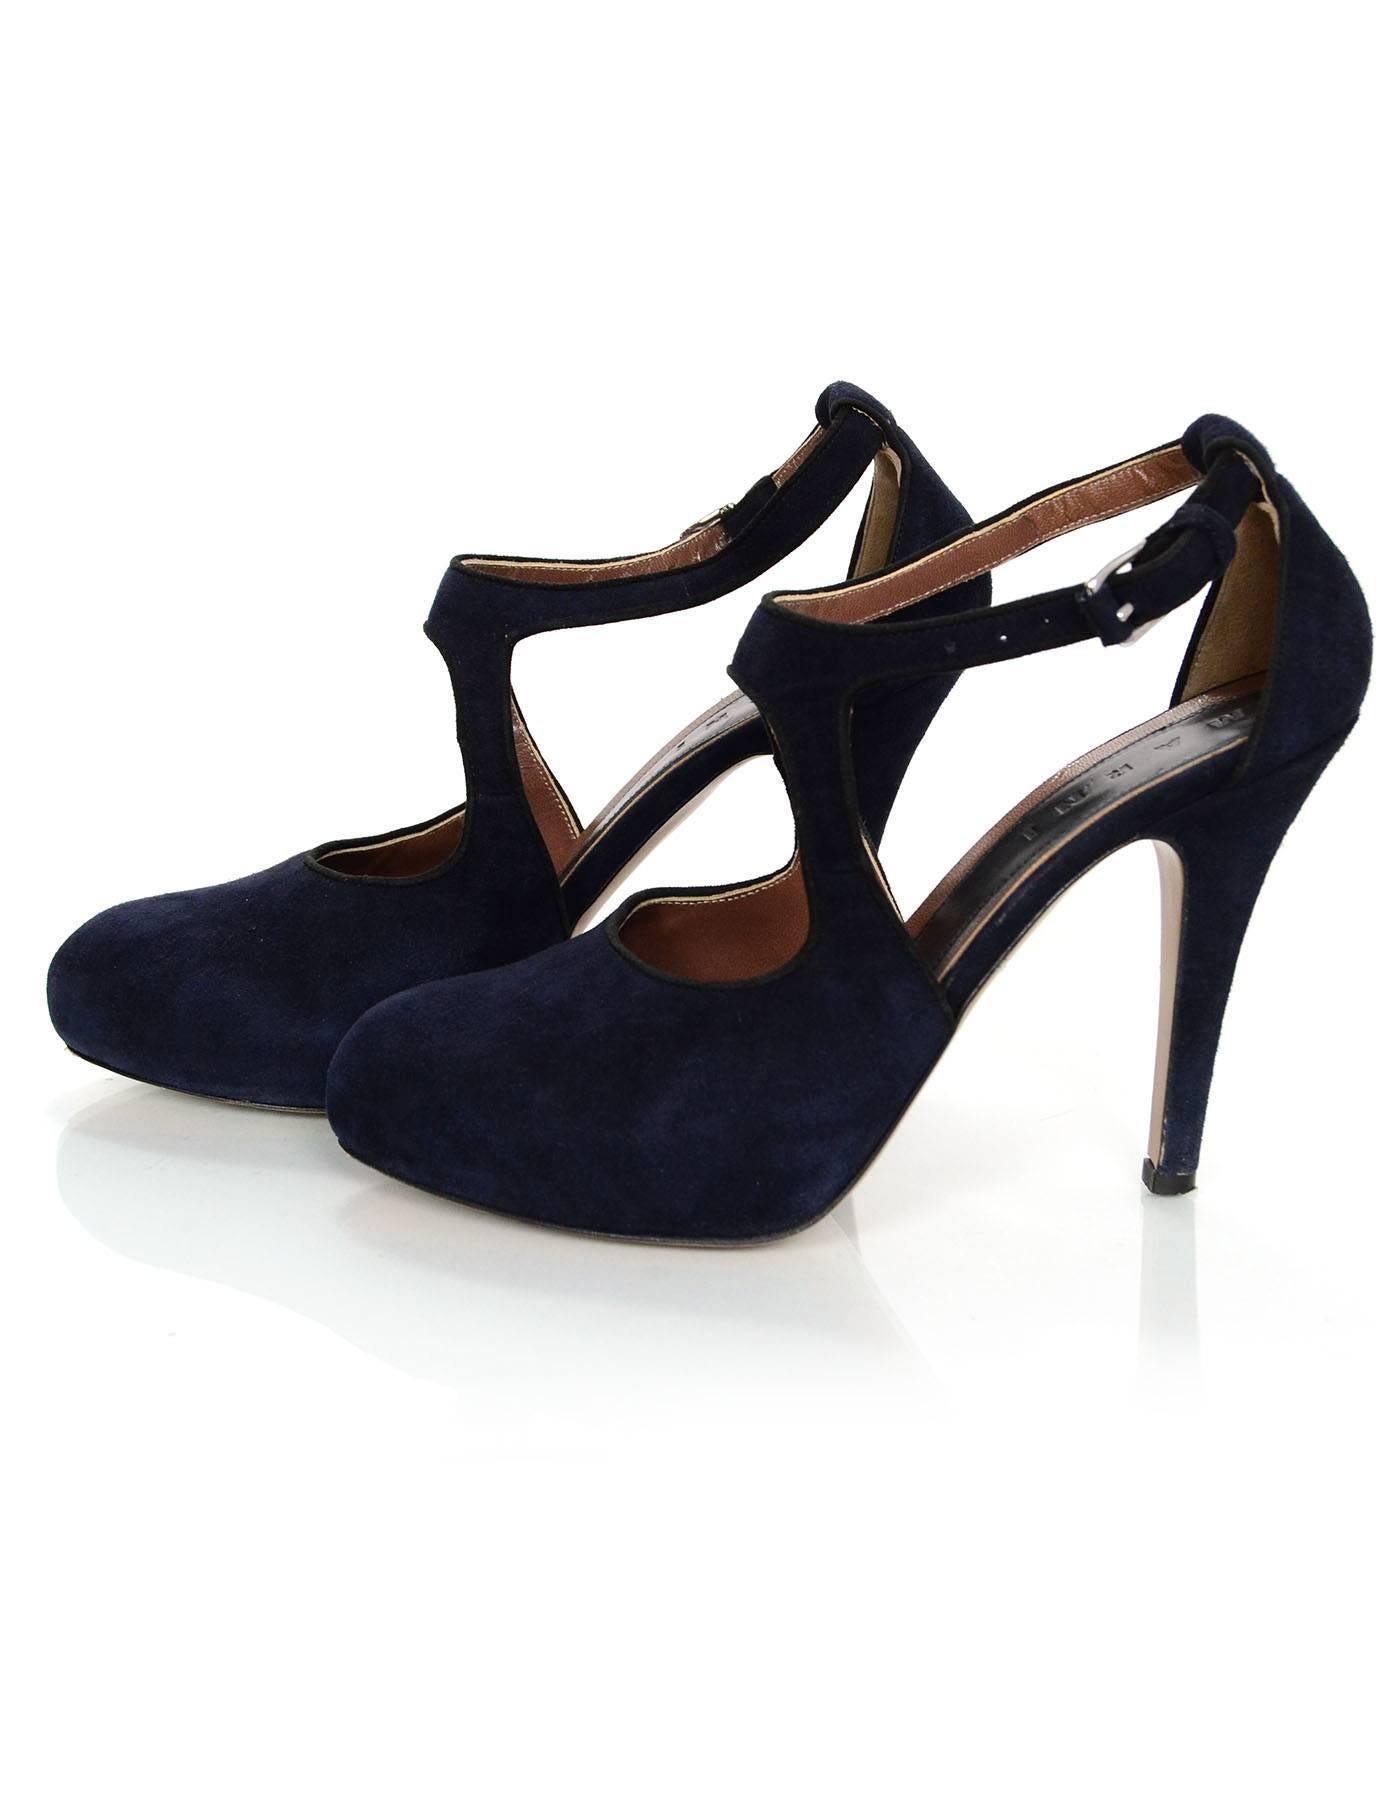 Marni Navy Suede Pumps Sz 38
Features hidden front platform

Made In: Italy
Color: Navy
Materials: Suede
Closure/Opening: Buckle closure at ankle
Sole Stamp: Vero Cuoio Made in Italy 38
Overall Condition: Excellent pre-owned condition with